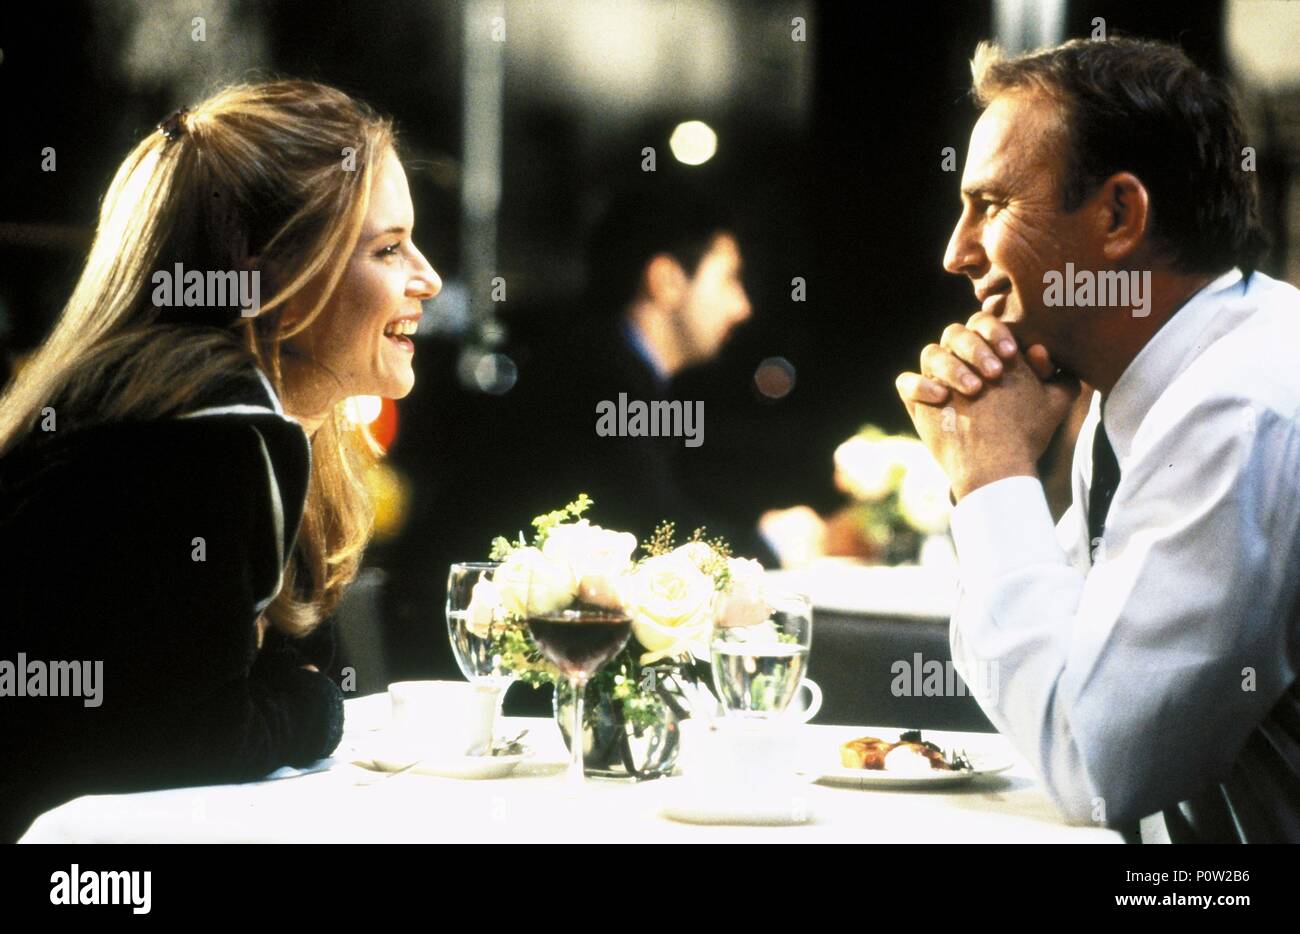 https://c8.alamy.com/comp/P0W2B6/original-film-title-for-love-of-the-game-english-title-for-love-of-the-game-film-director-sam-raimi-year-1999-stars-kelly-preston-kevin-costner-credit-universal-pictures-glass-ben-album-P0W2B6.jpg